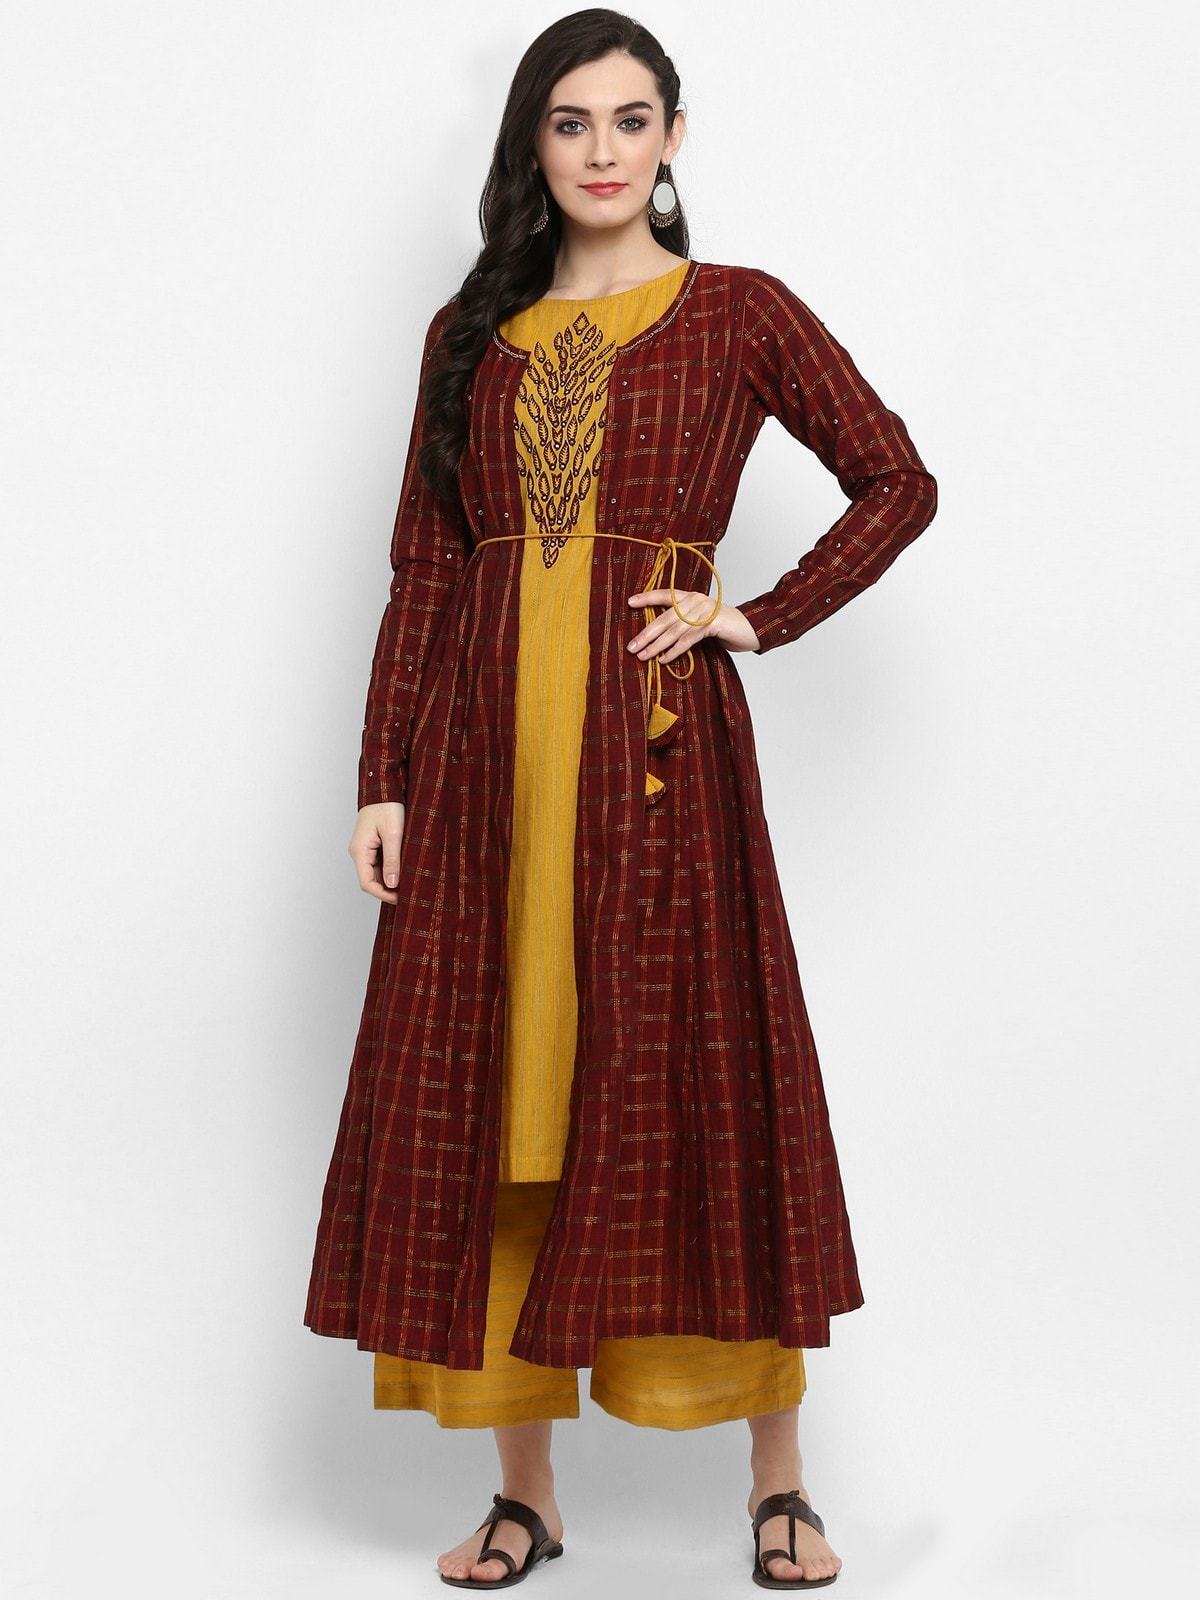 Women's Handloom Embroidered Top With Jacket And Pants - Pannkh